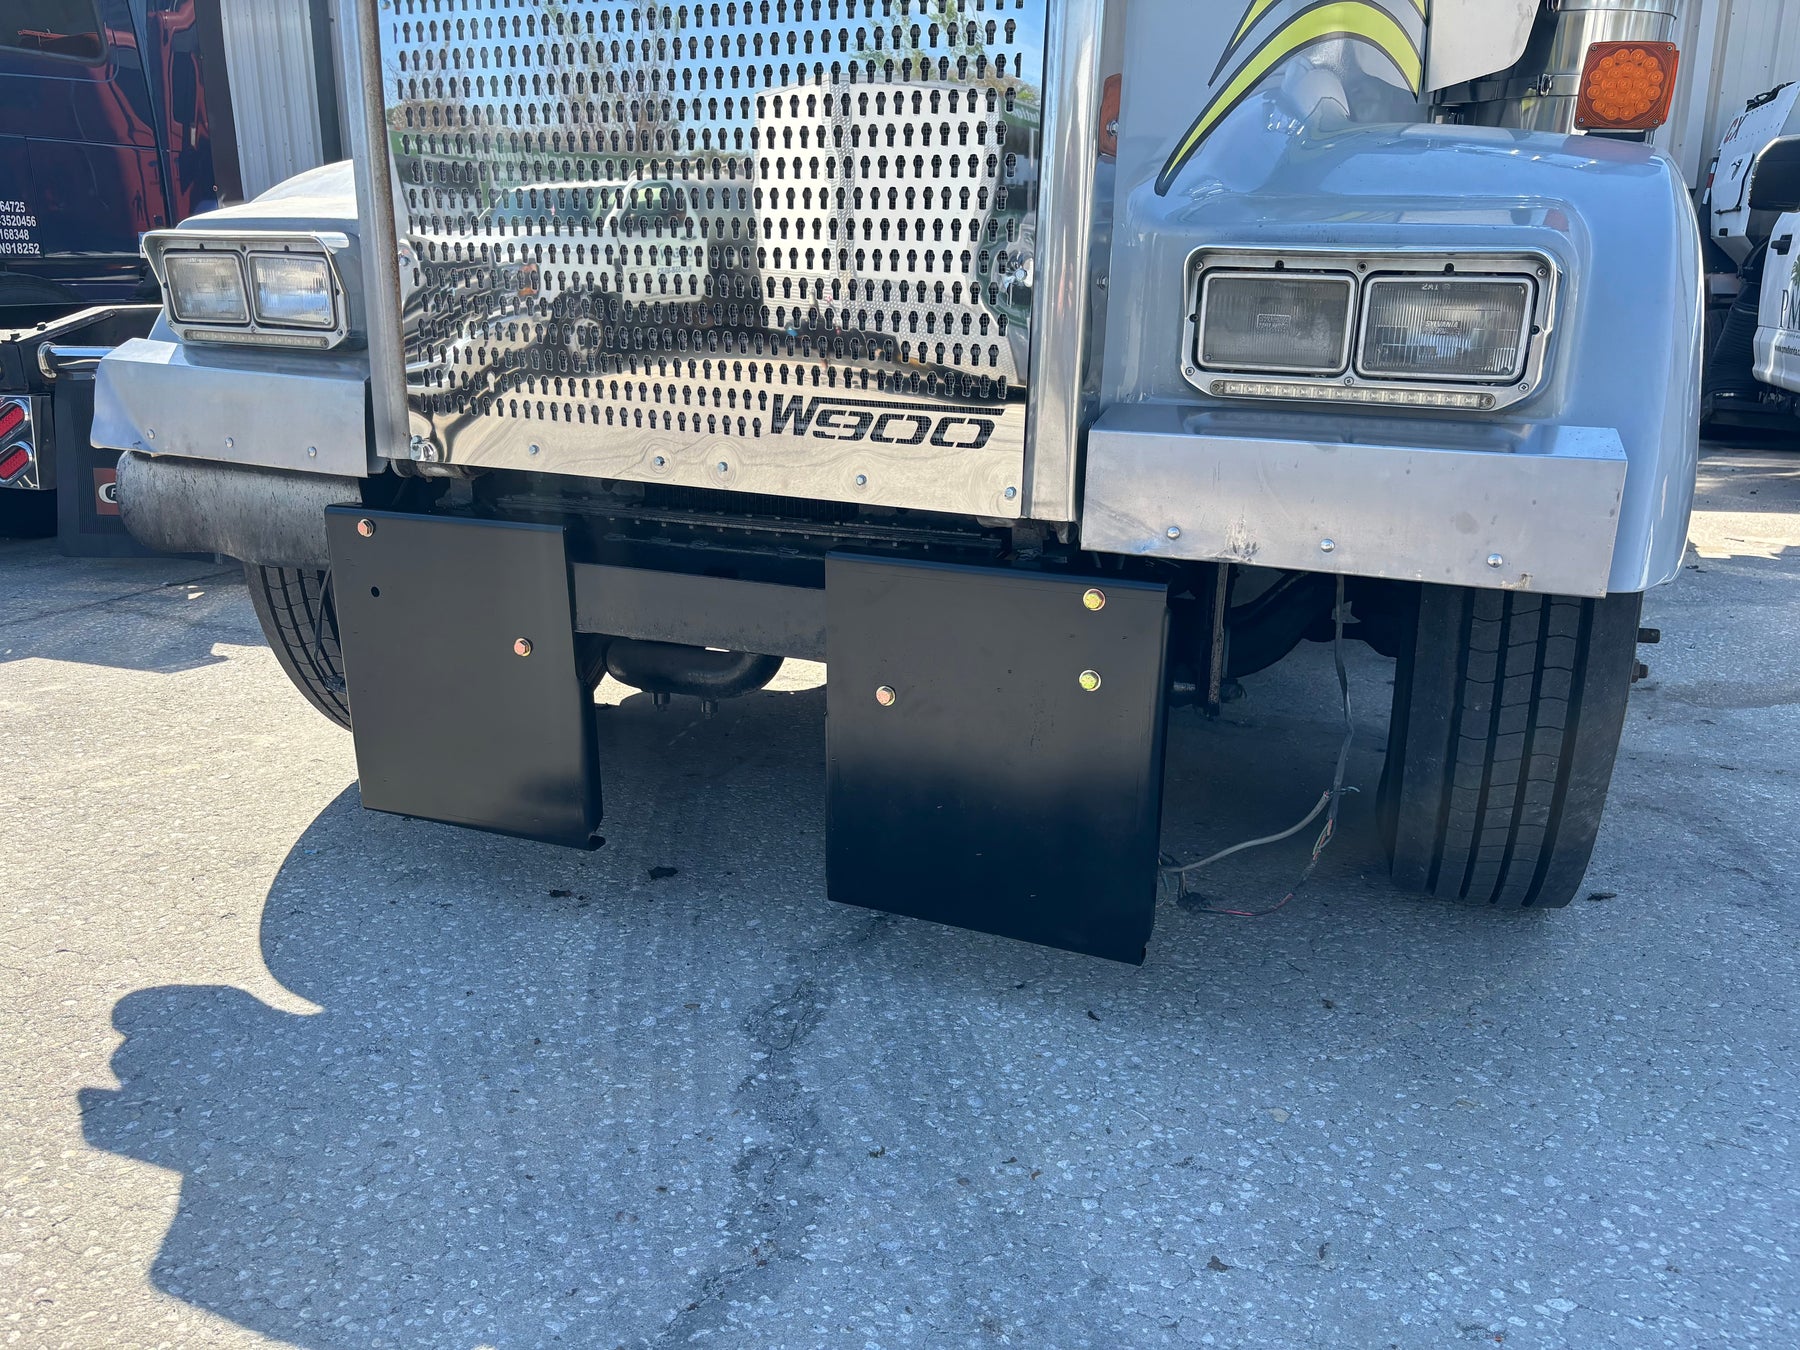 Kenworth W900 Steynless Steel Mitered End Bumper, Blind Mount & Mounting Plates For Kenworth By Floridas Finest Customs Works, Mirror Finish Made In USA